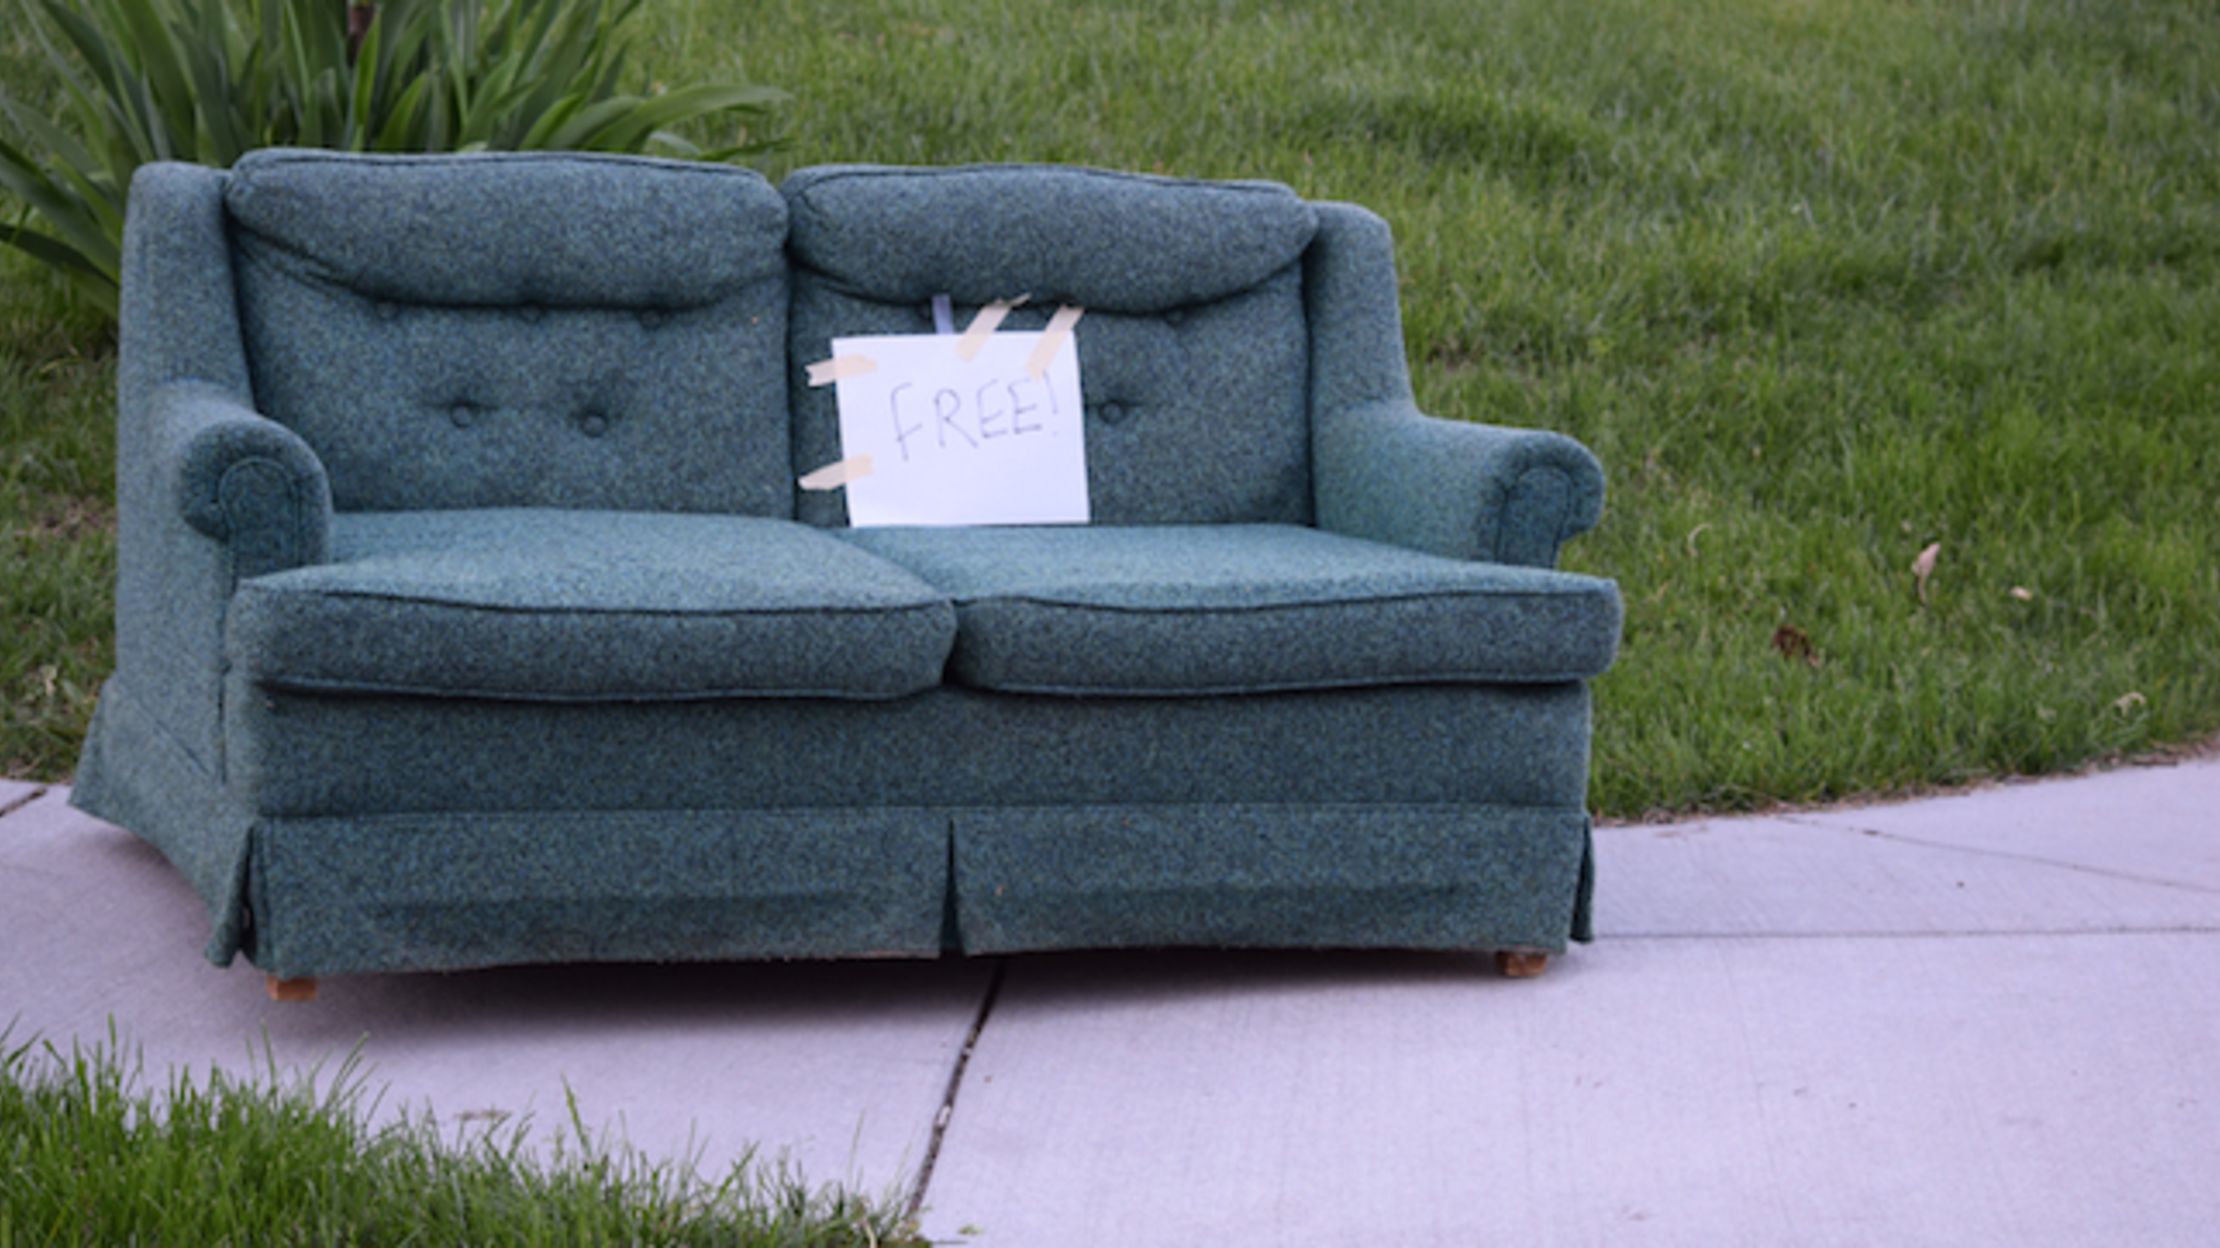 Sell Your Furniture Online in 5 Simple Steps | Mental Floss